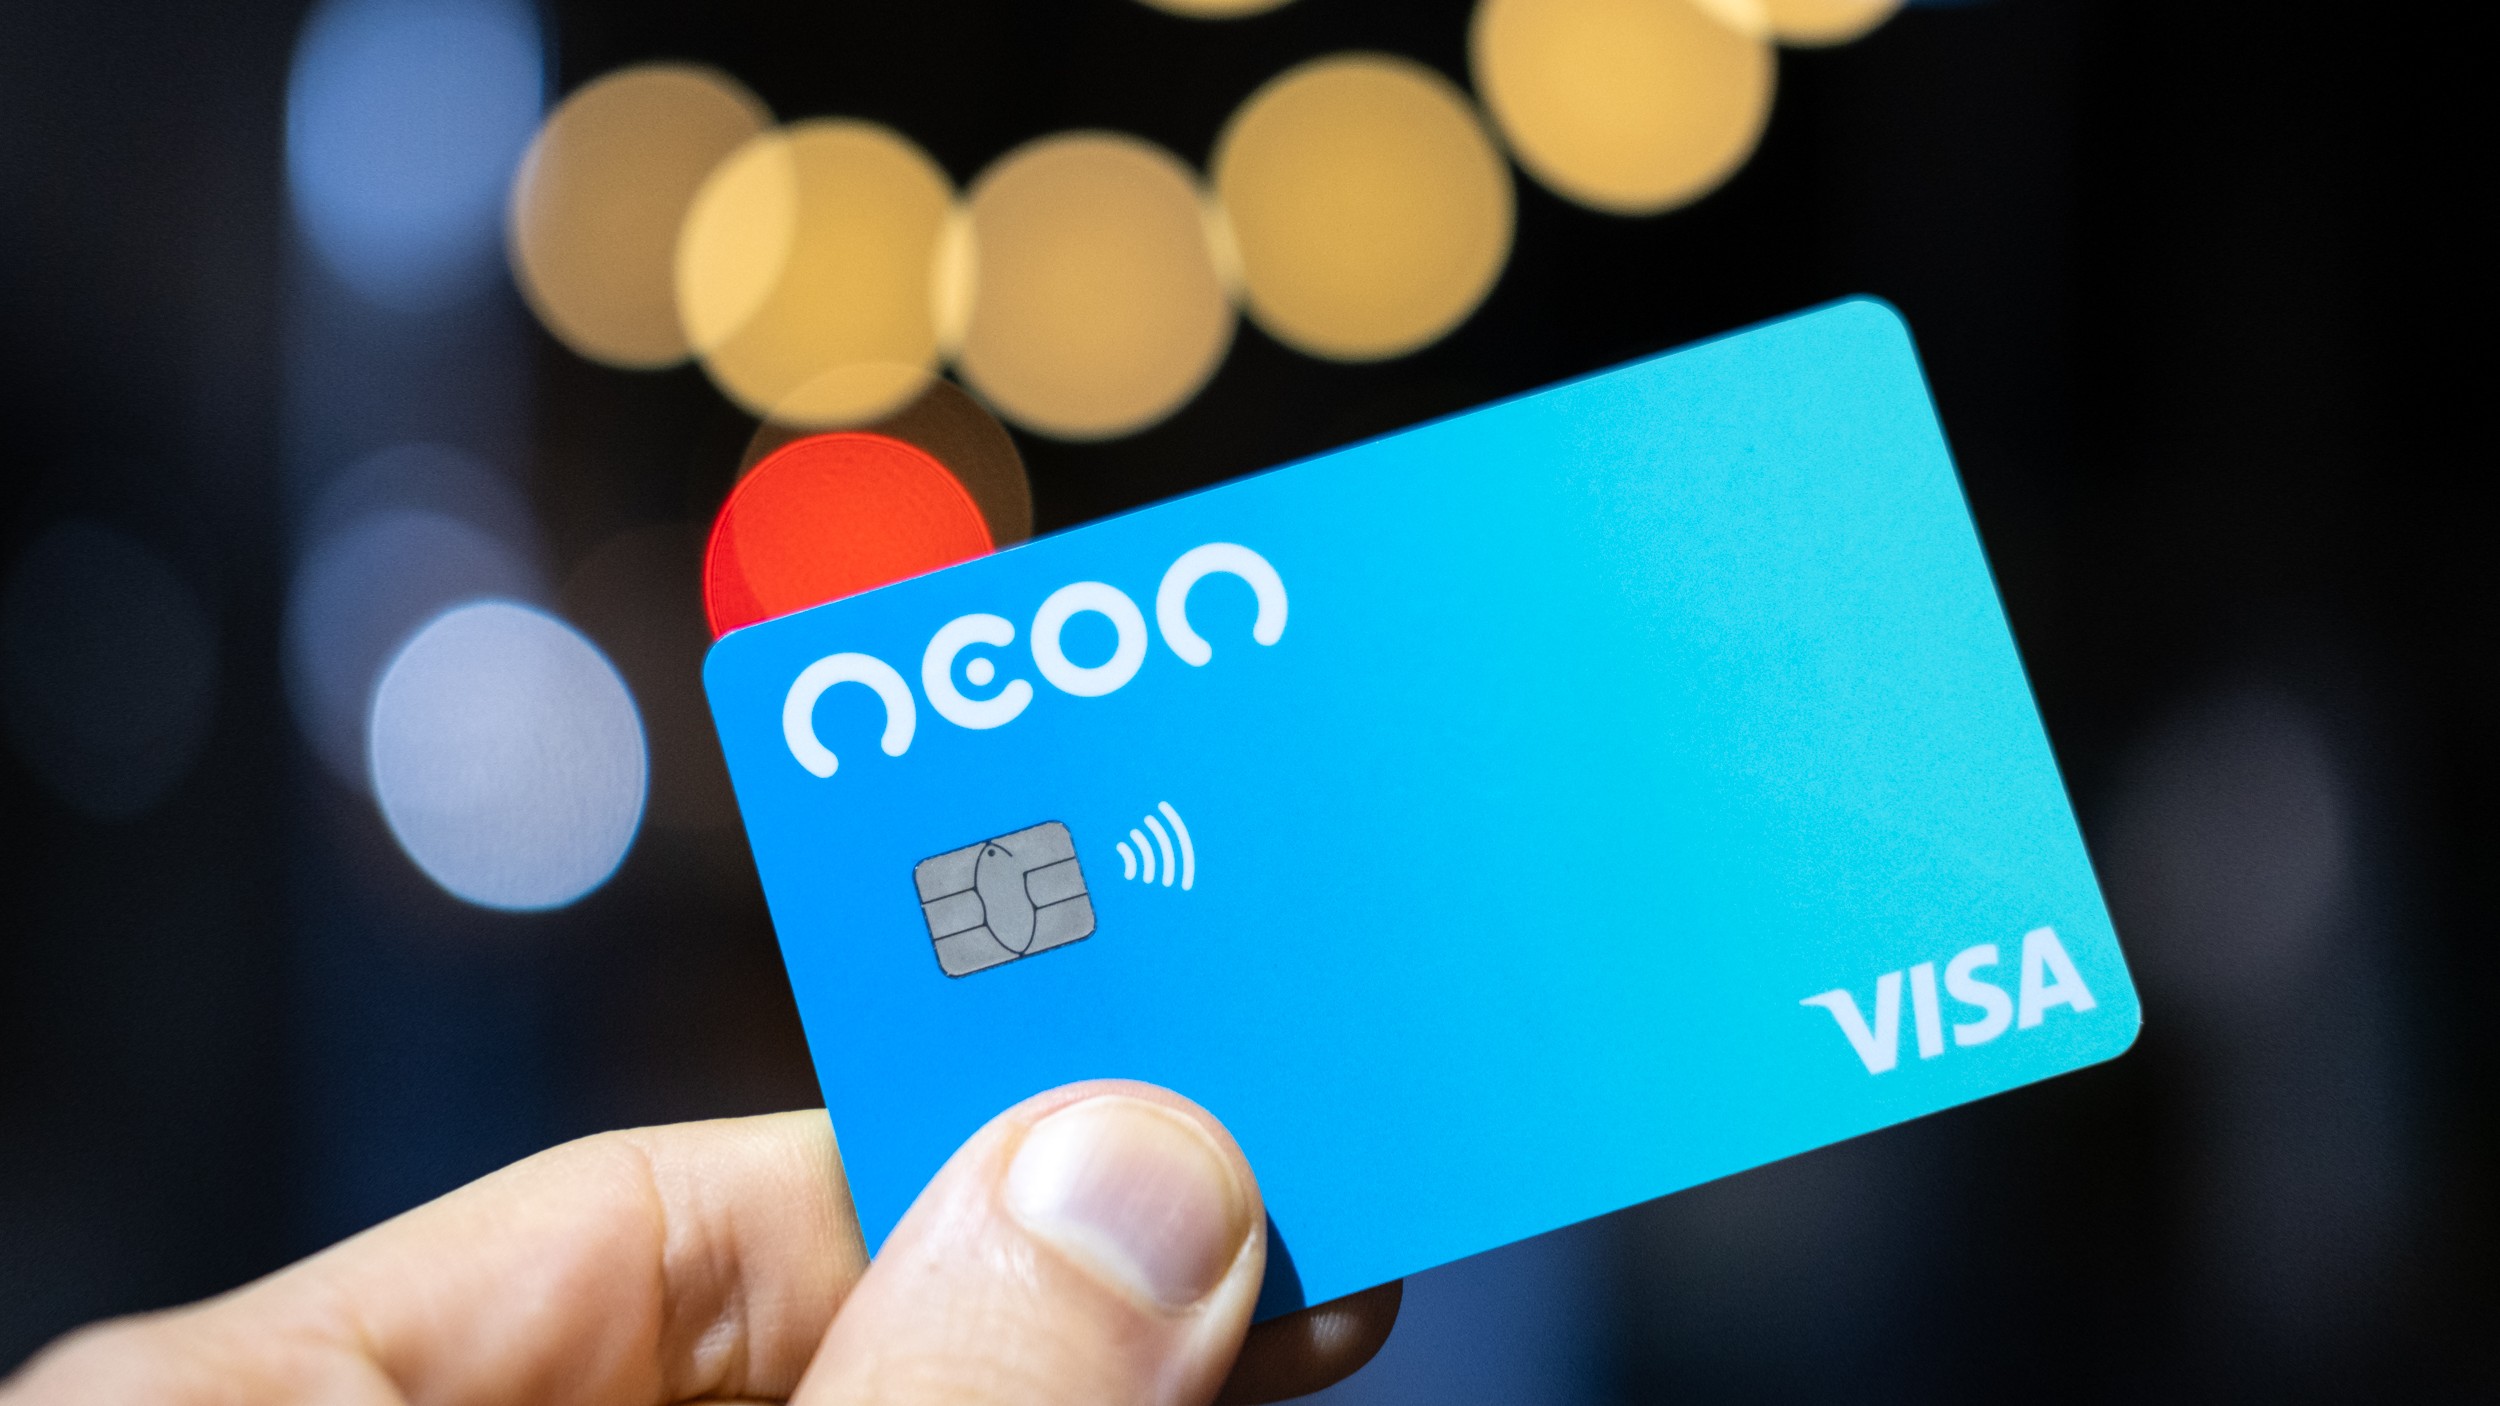 Neon is the new Brazilian unicorn, after receiving an investment of R$ 1.6 billion